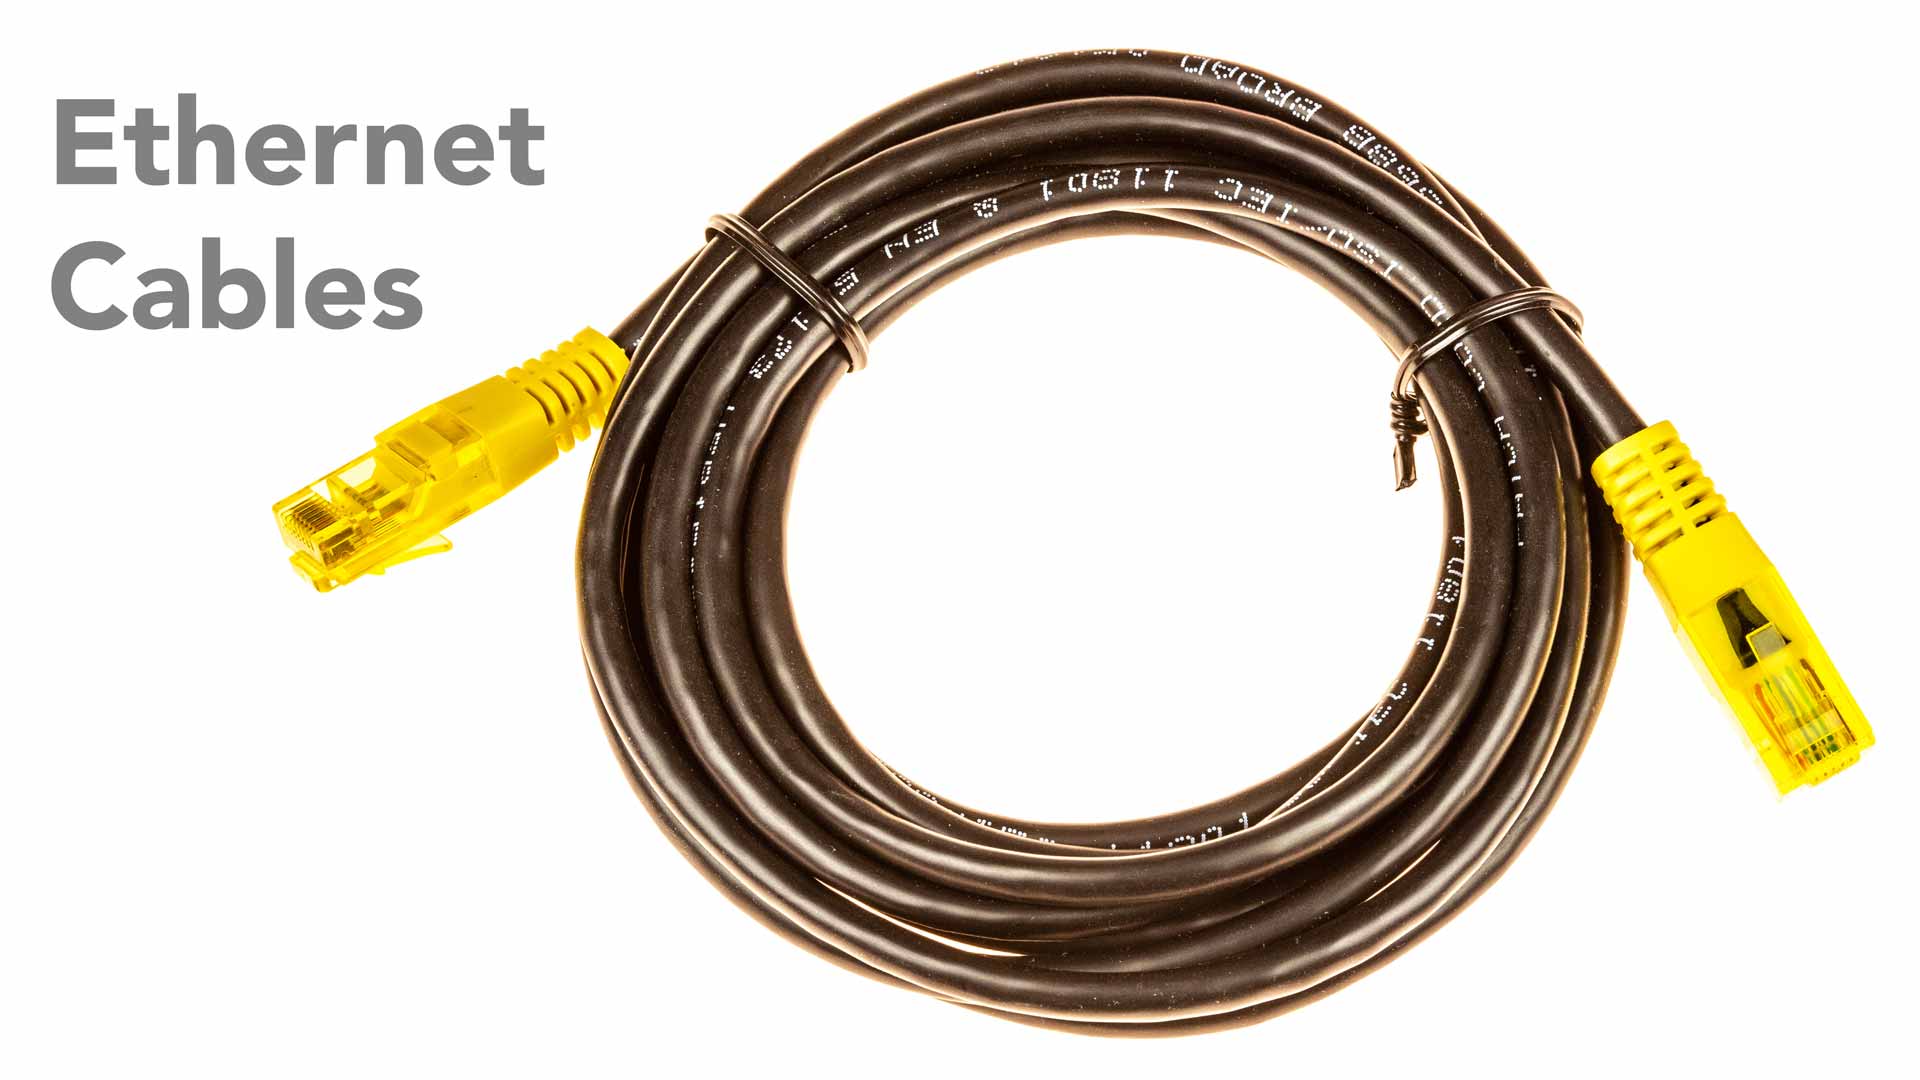 How To Choose An Ethernet Cable? (CAT 5E, CAT 6, CAT 7, And CAT 8